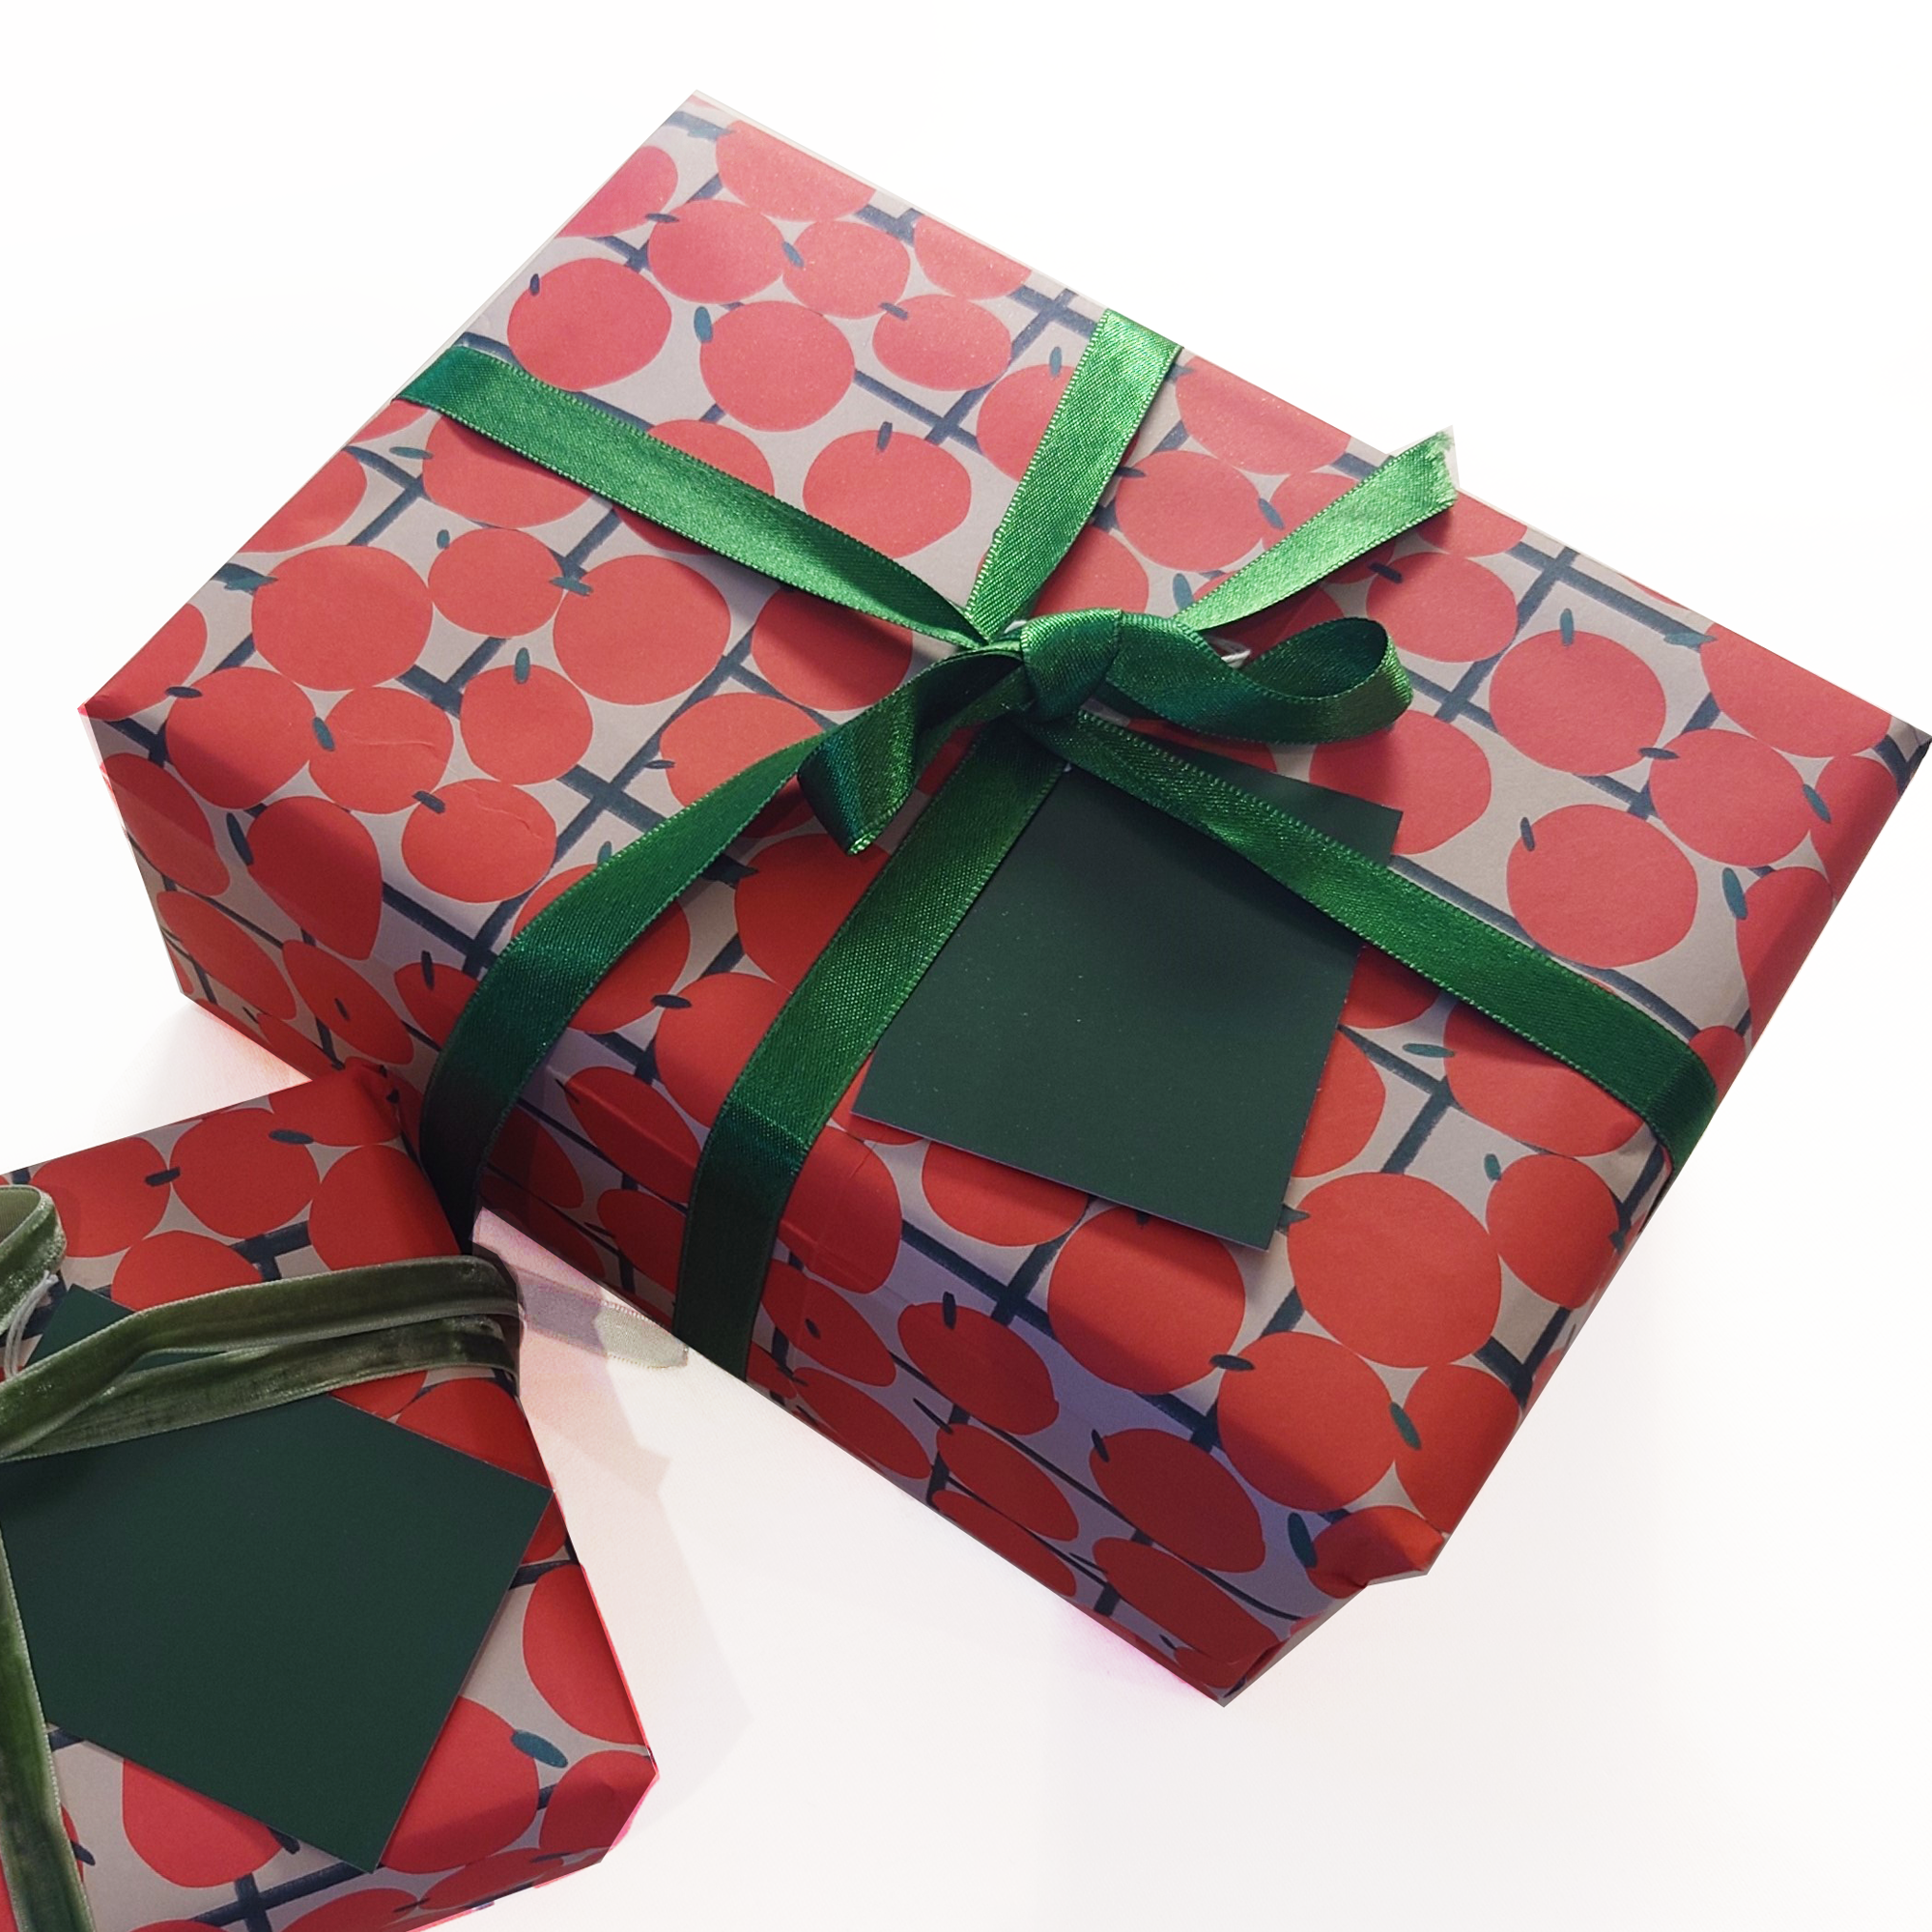 Clementine Wrapping Paper Pack by Molly Bland - 4 Sheets and 4 Tags